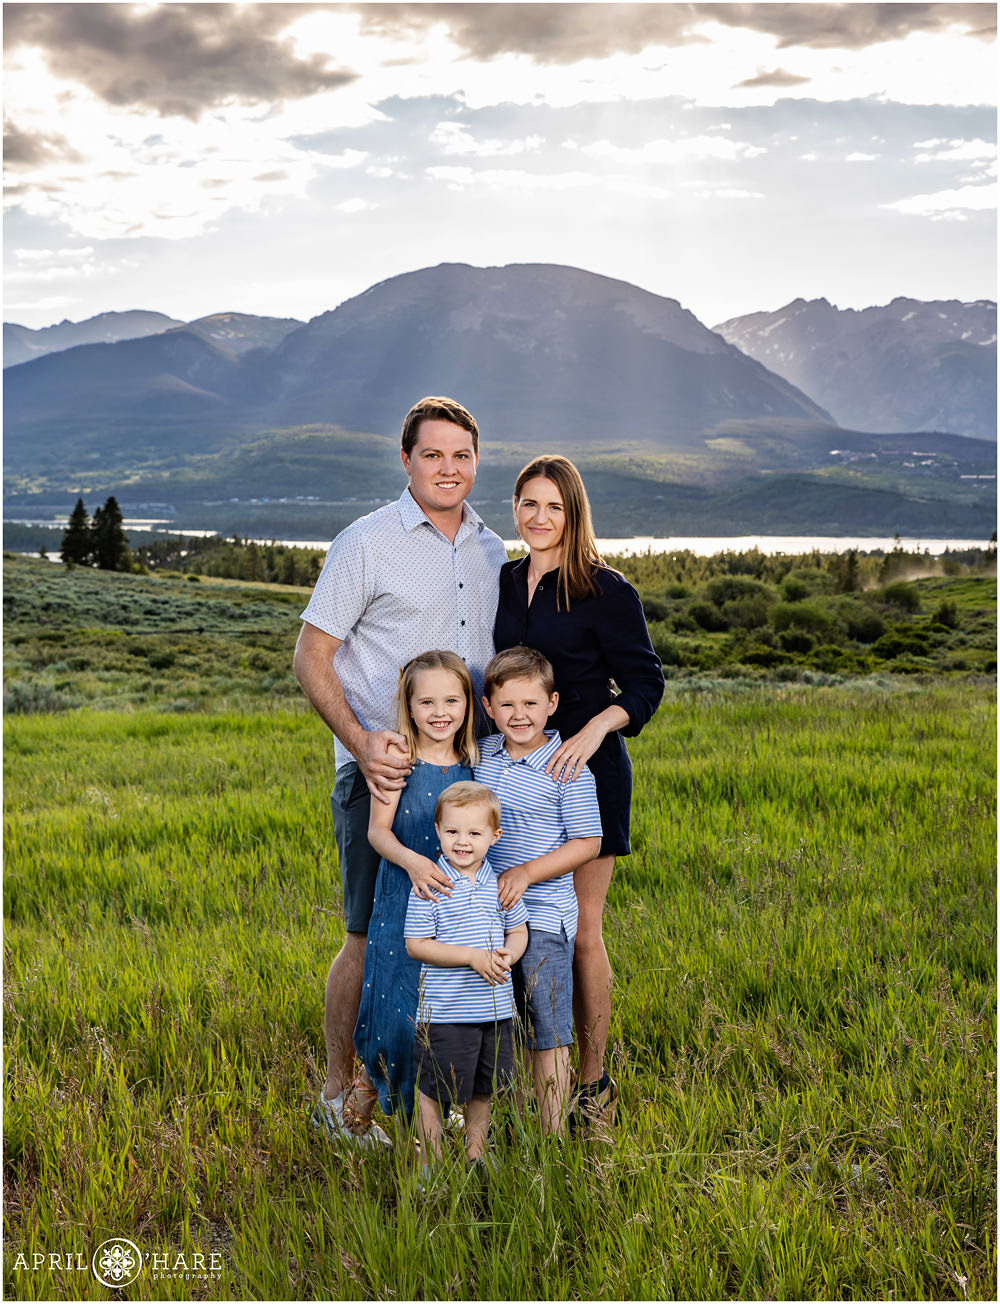 A family of 5 with 3 young children pose for a family picture in front of a pretty mountain view in Colorado